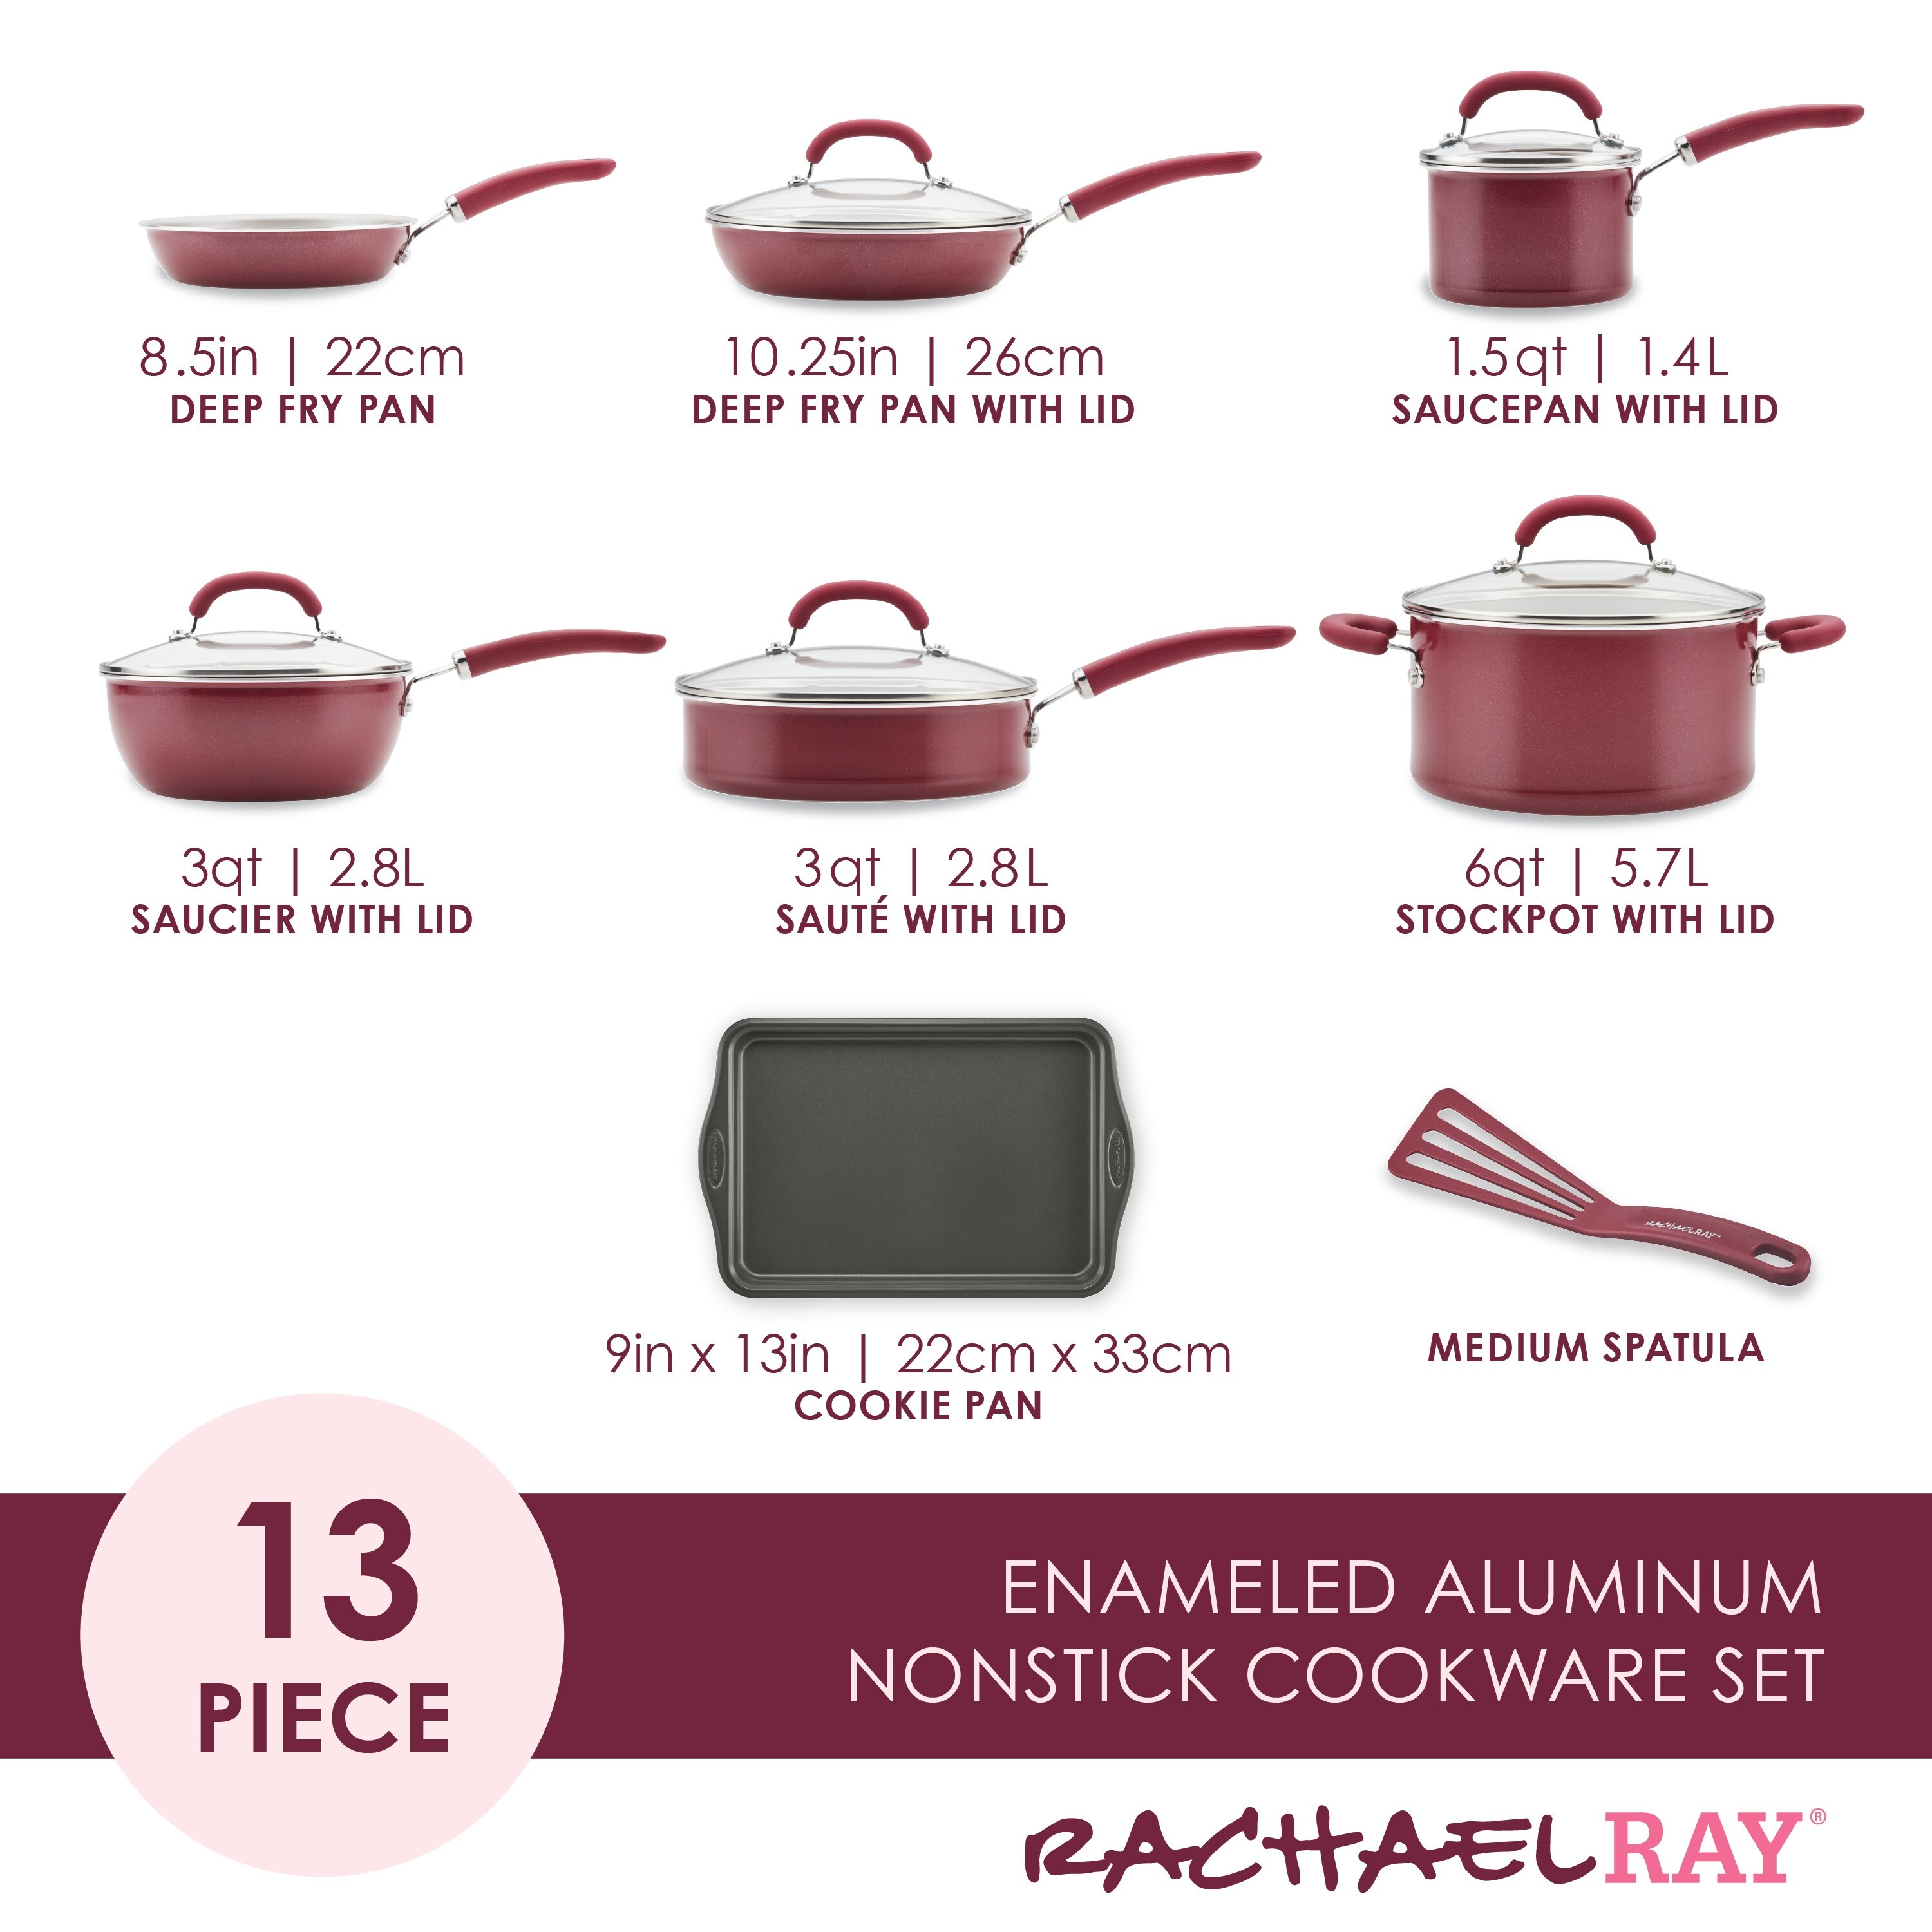 https://ak1.ostkcdn.com/images/products/is/images/direct/31d37399064f7b72a2f0033b74d905cbcd244af4/Rachael-Ray-Create-Delicious-Aluminum-Nonstick-Cookware-Induction-Pots-and-Pans-Set%2C-13-Piece%2C-Red-Shimmer.jpg